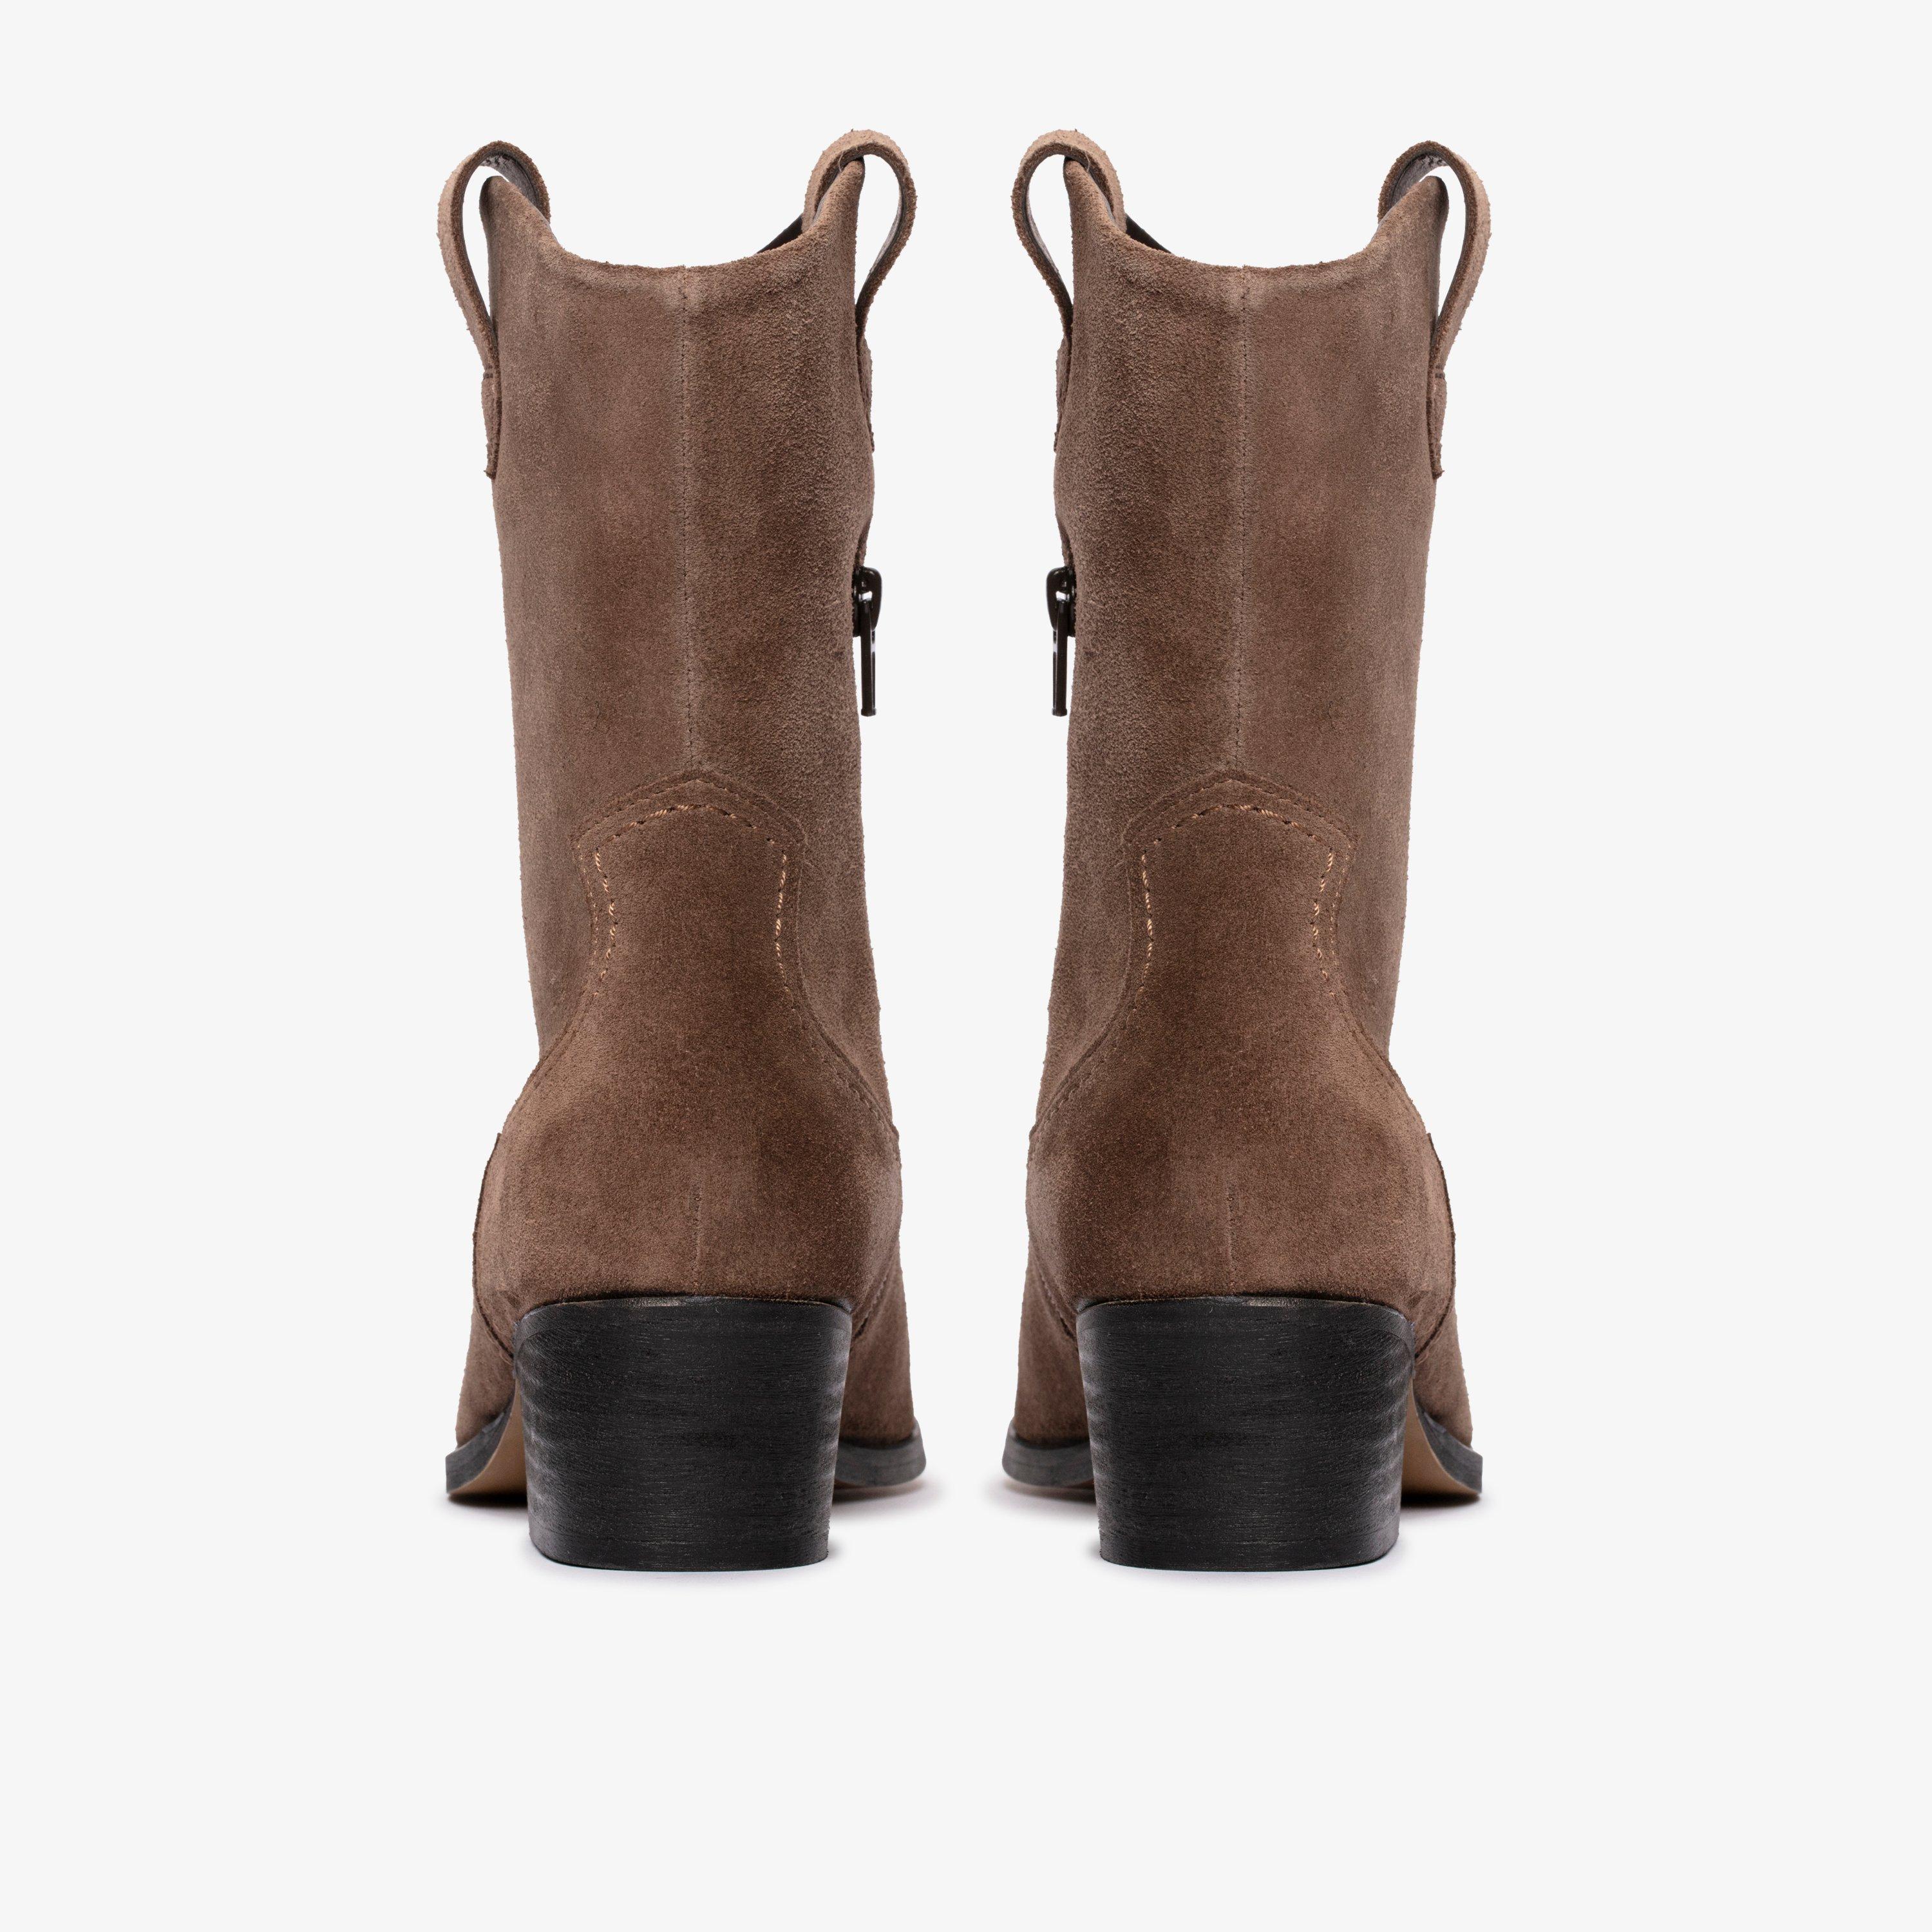 Women's Ankle Boots - Leather & Suede Ankle Boots | Clarks US